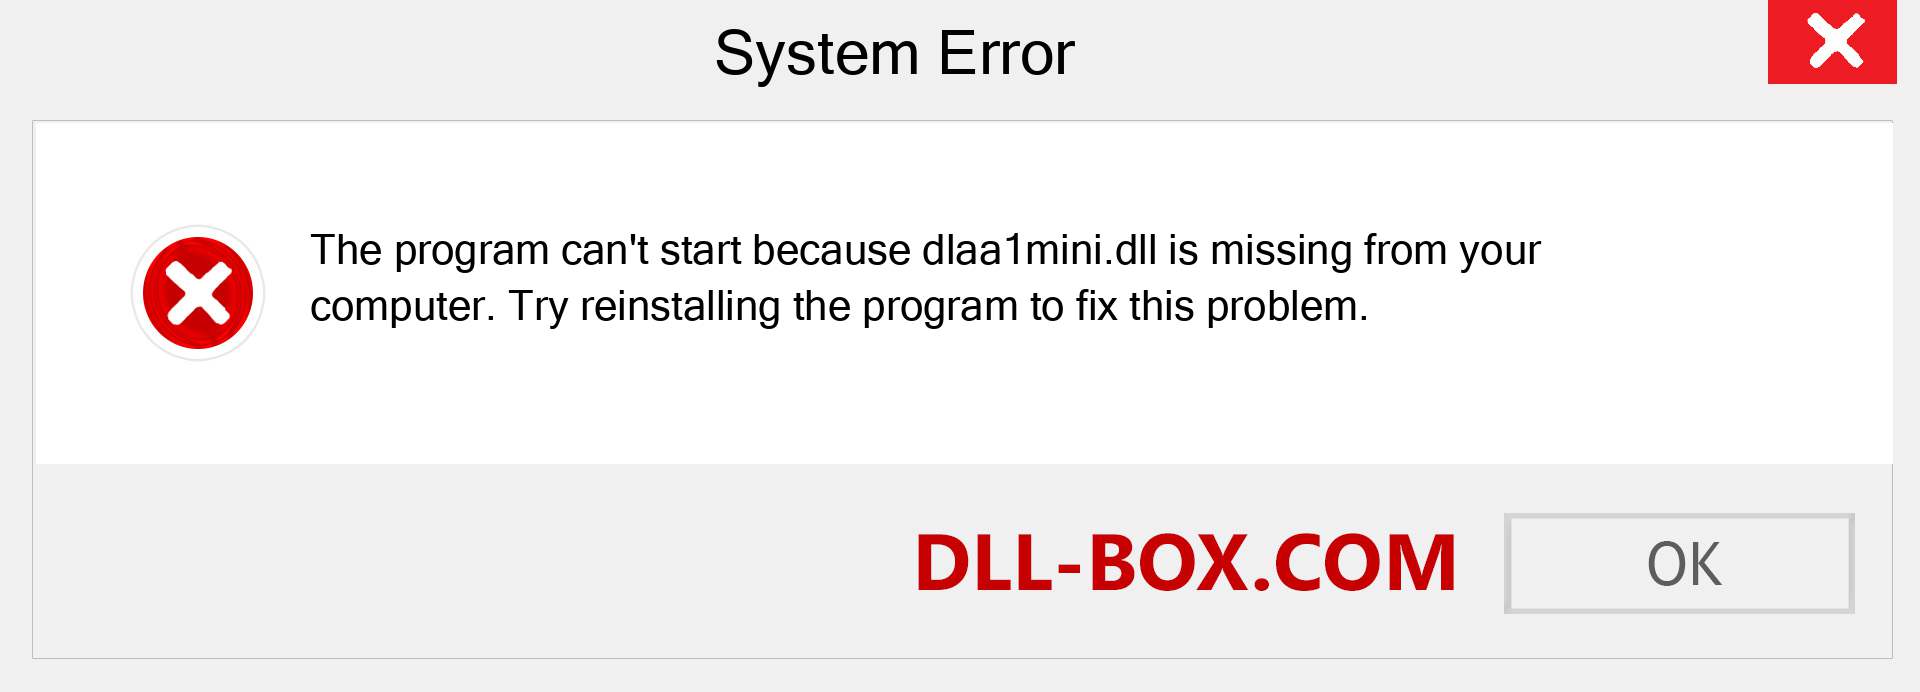  dlaa1mini.dll file is missing?. Download for Windows 7, 8, 10 - Fix  dlaa1mini dll Missing Error on Windows, photos, images